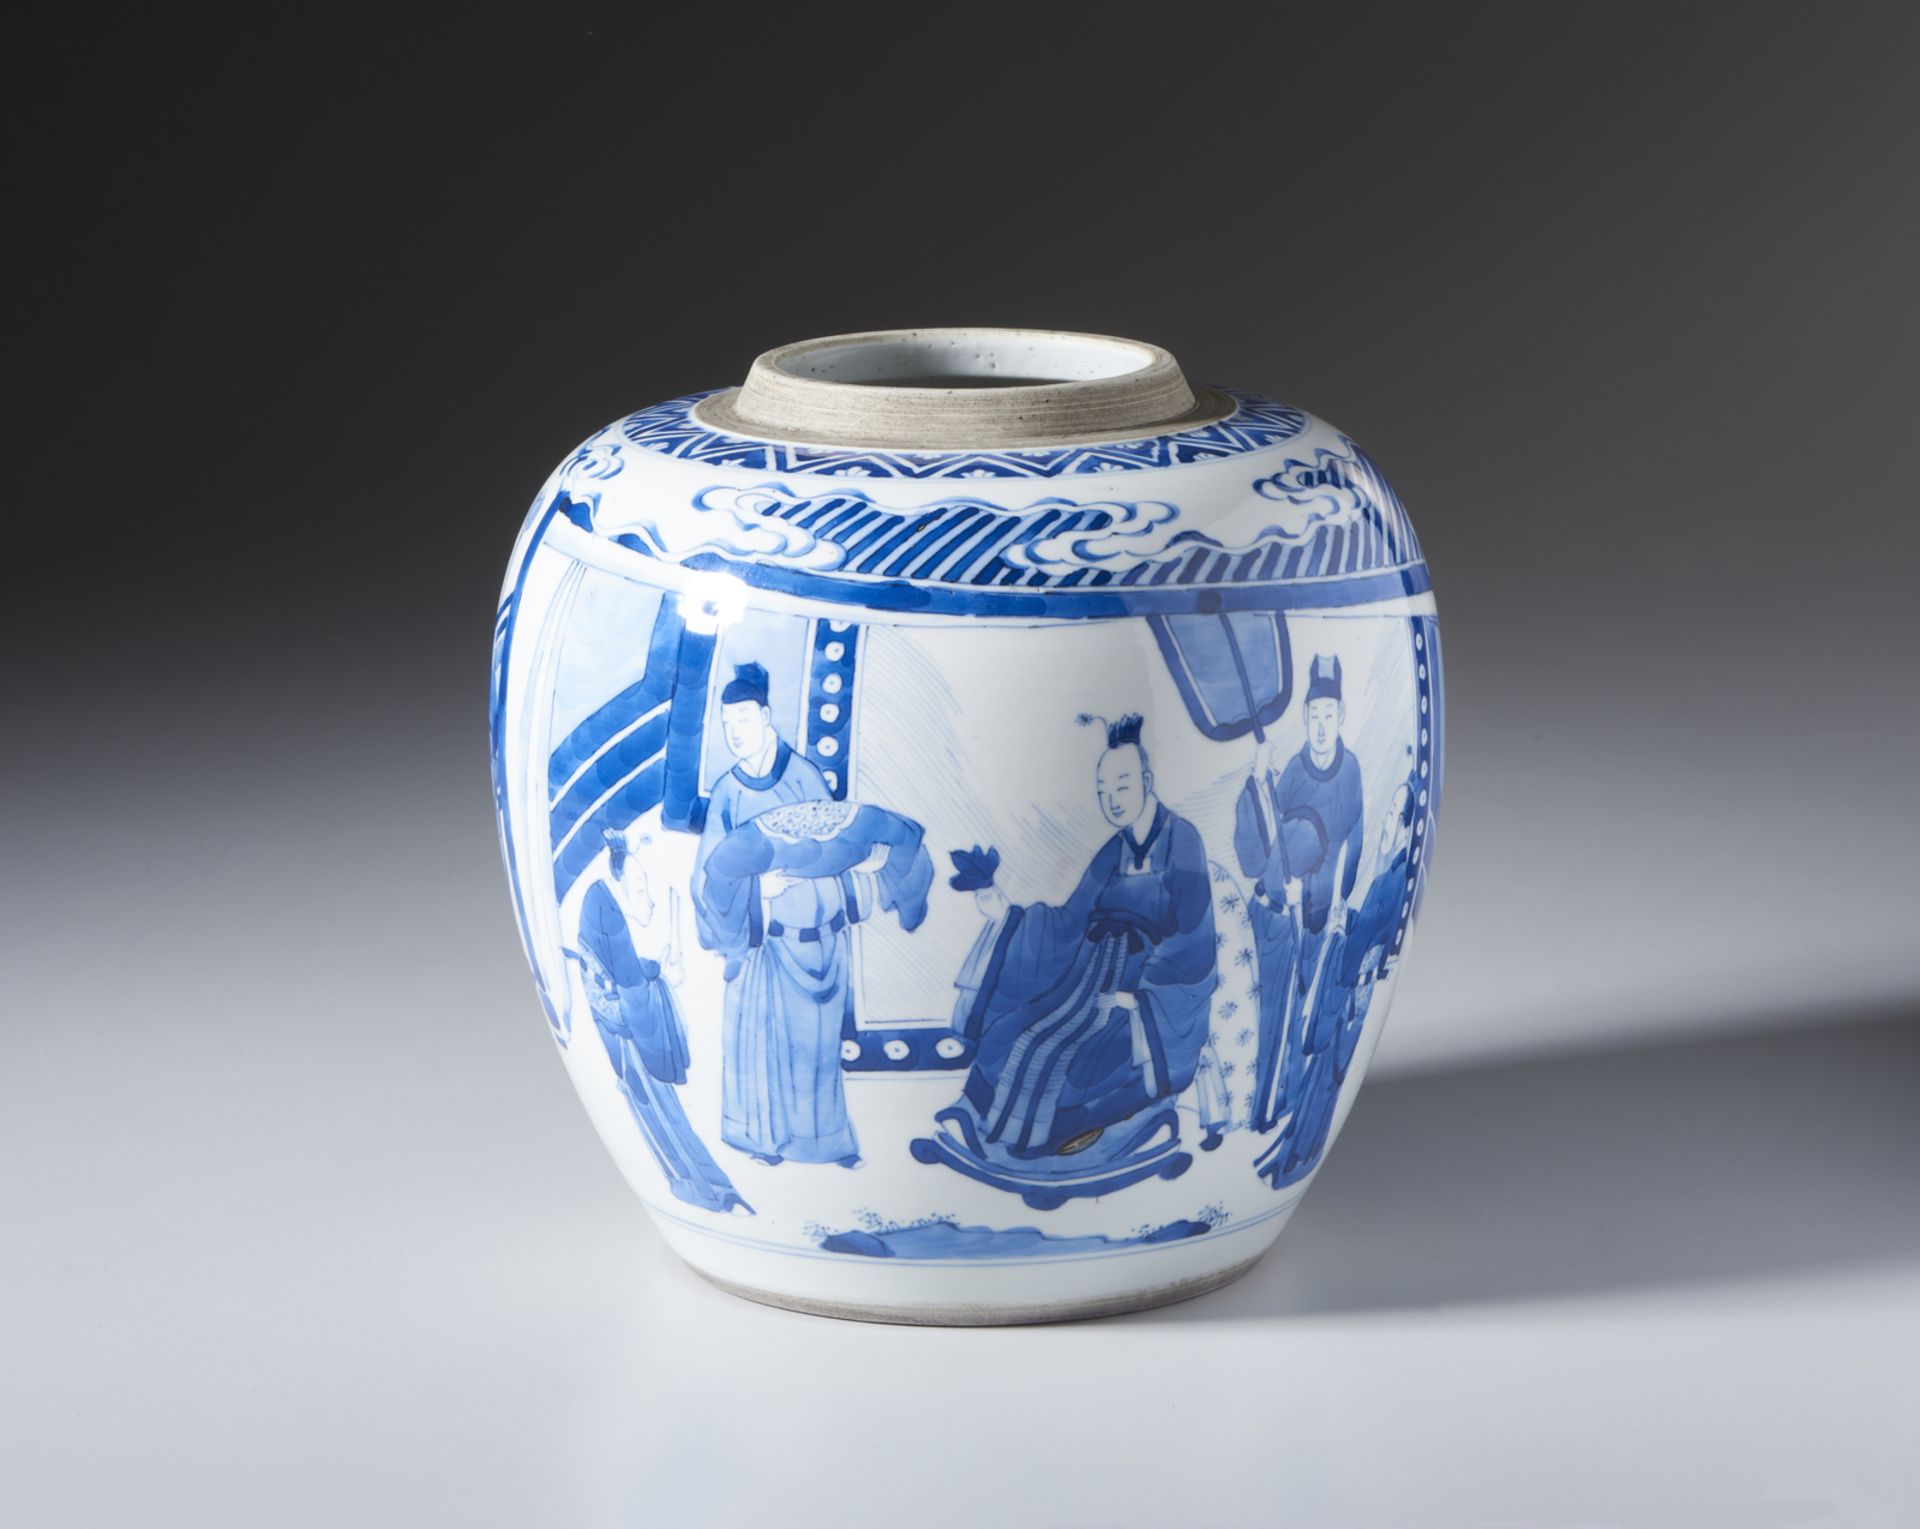 A fine blue&white porcelain jar, painted with figures in outdoor. On the base double circle mark